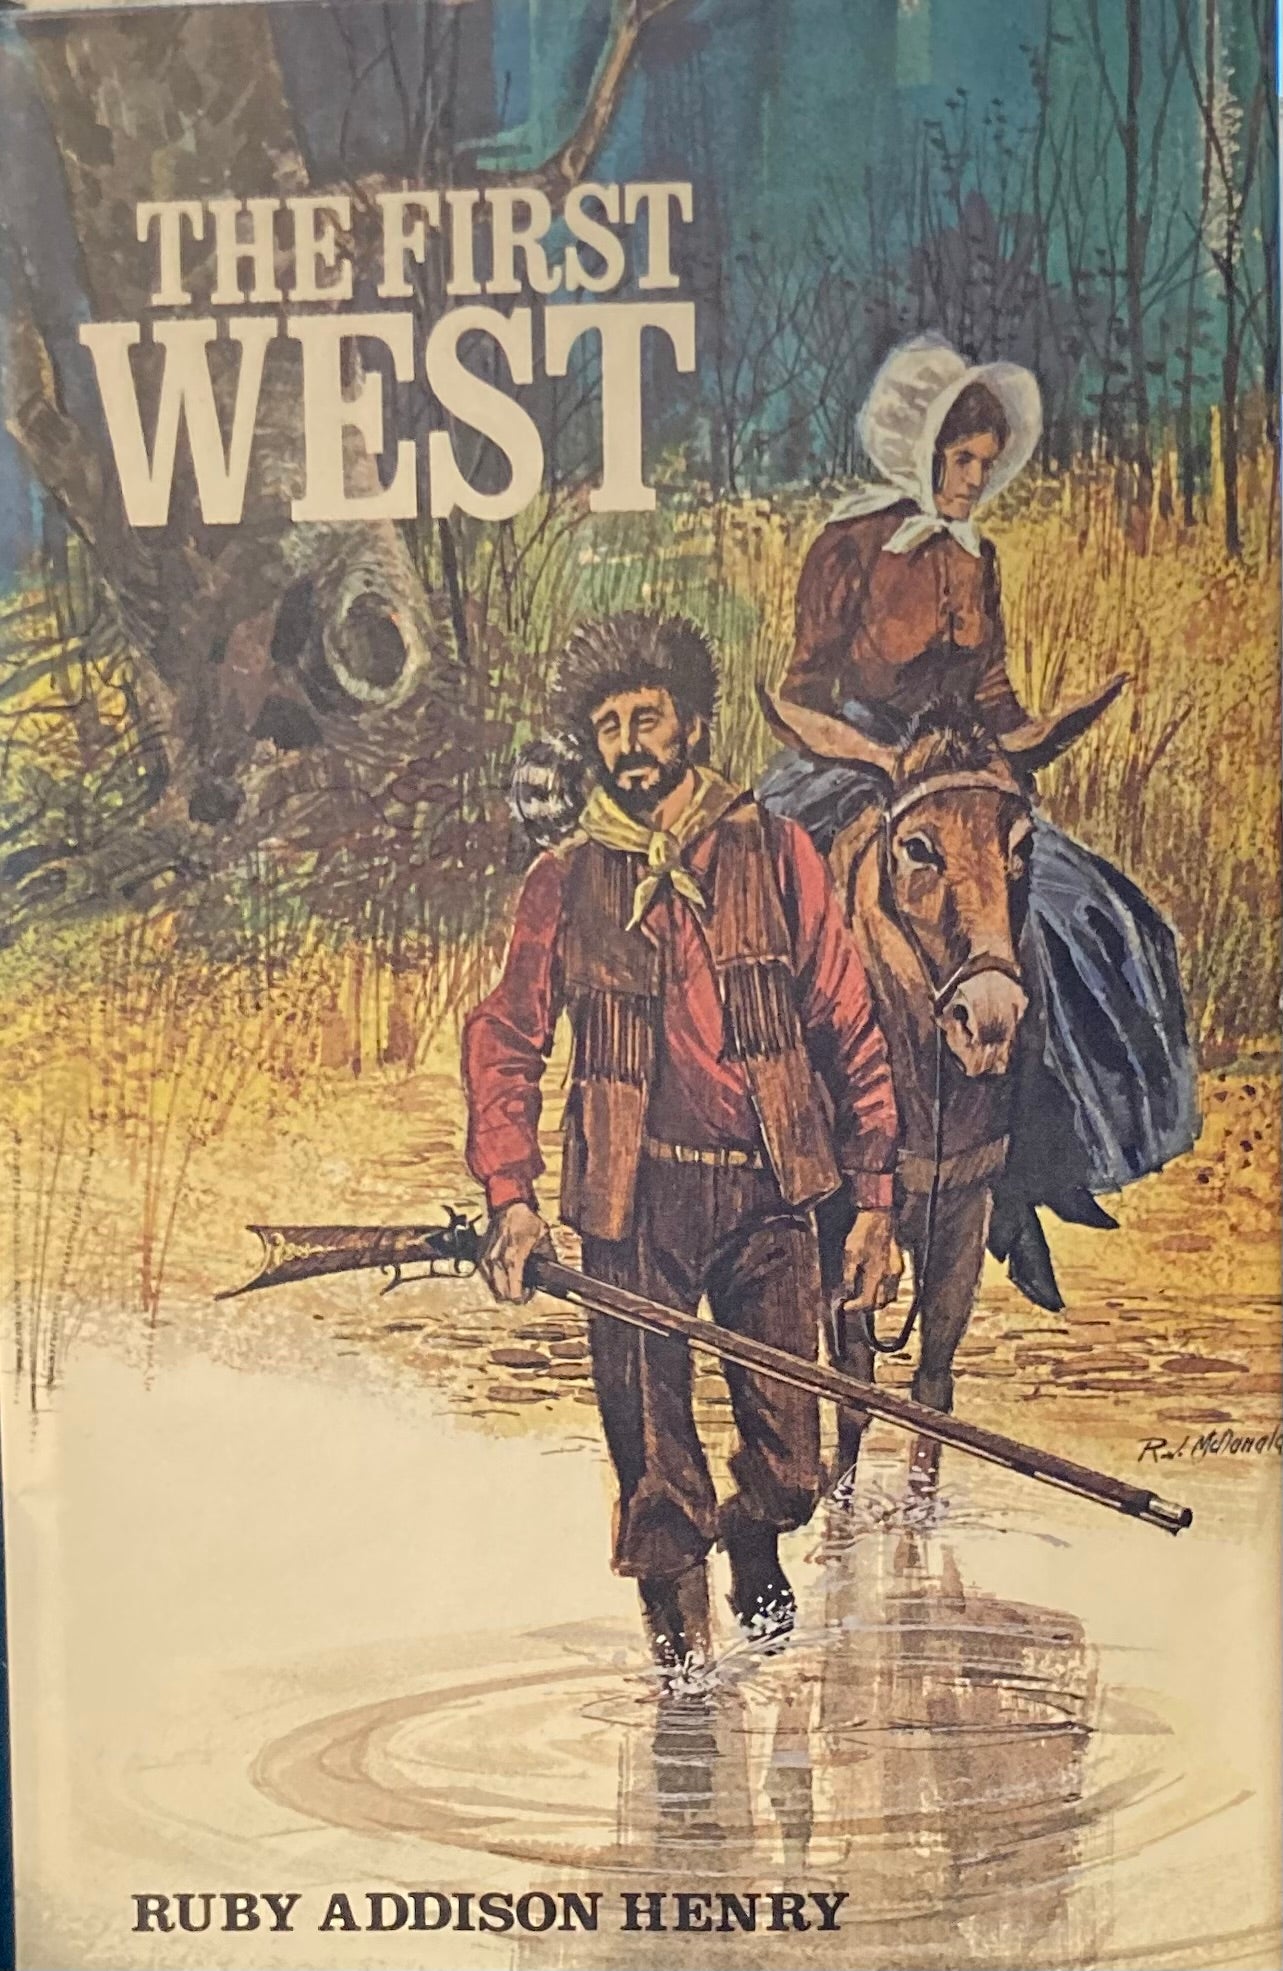 The First West